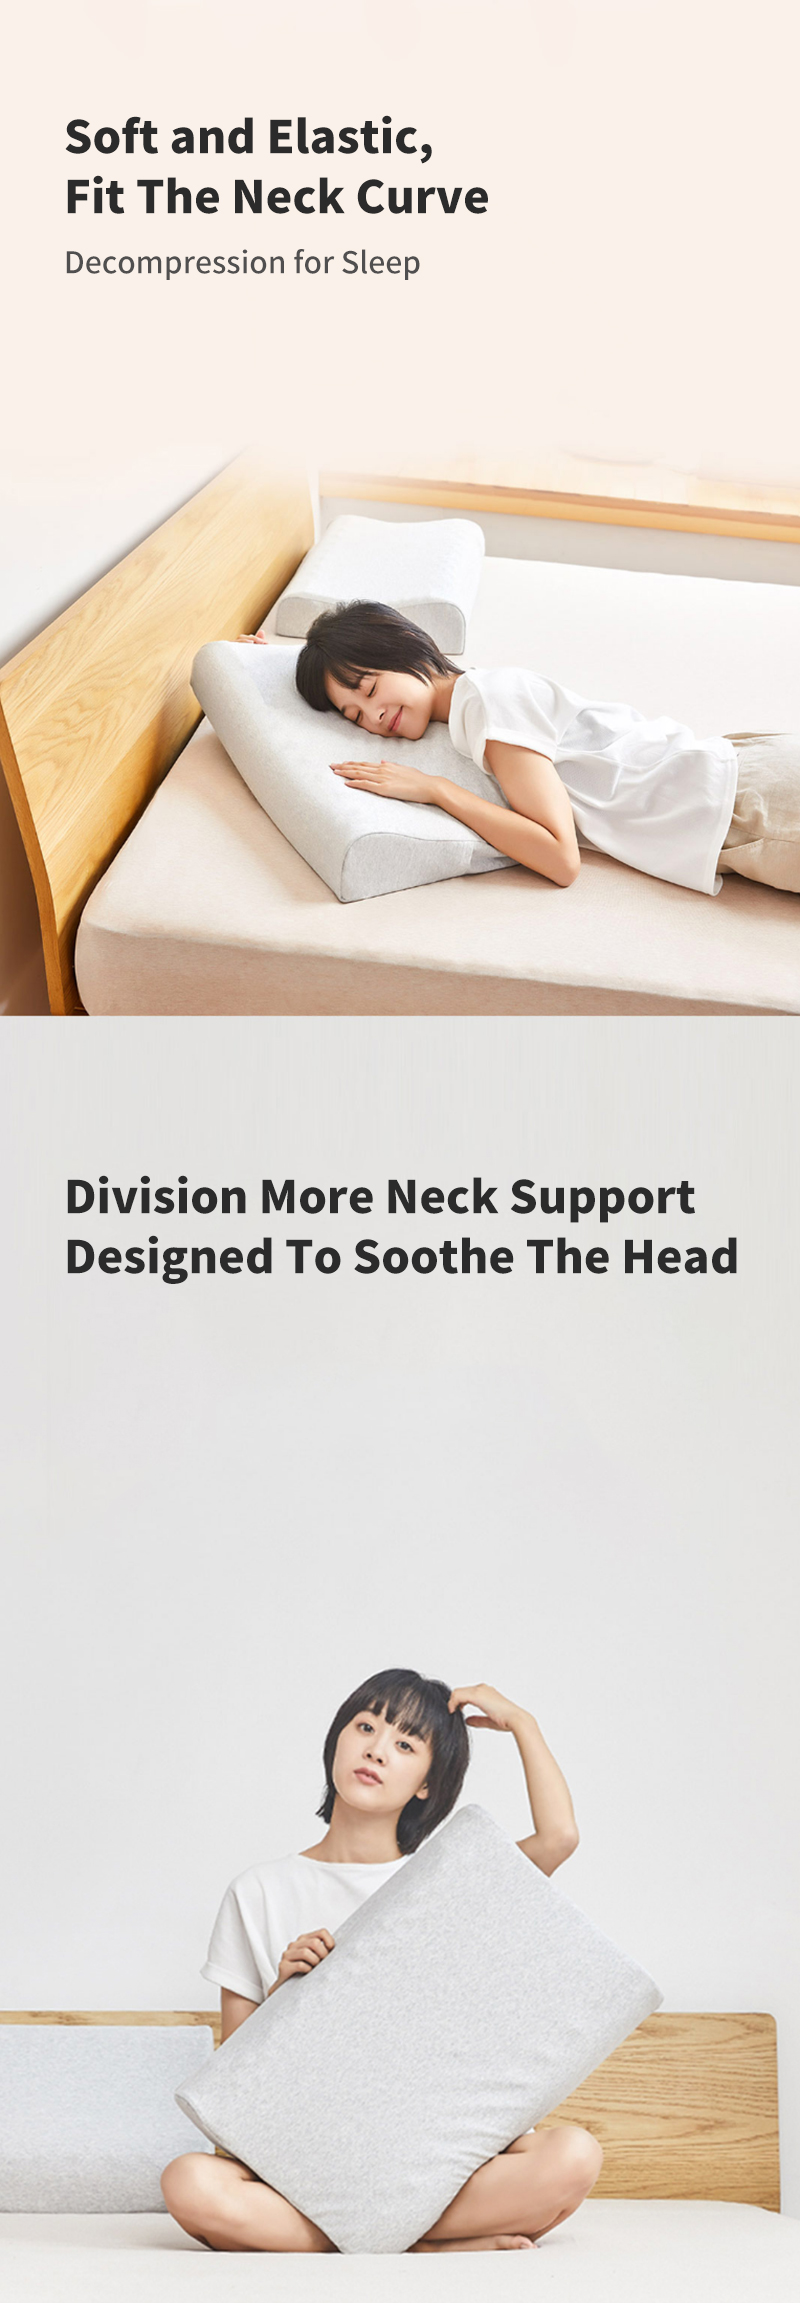 XIAOMI MIJIA Natural Latex Neck Pillow Three Curve Neck Guard Partitioned Particle Bulge Swedish Polygiene Antibacterial for Bedroom 20